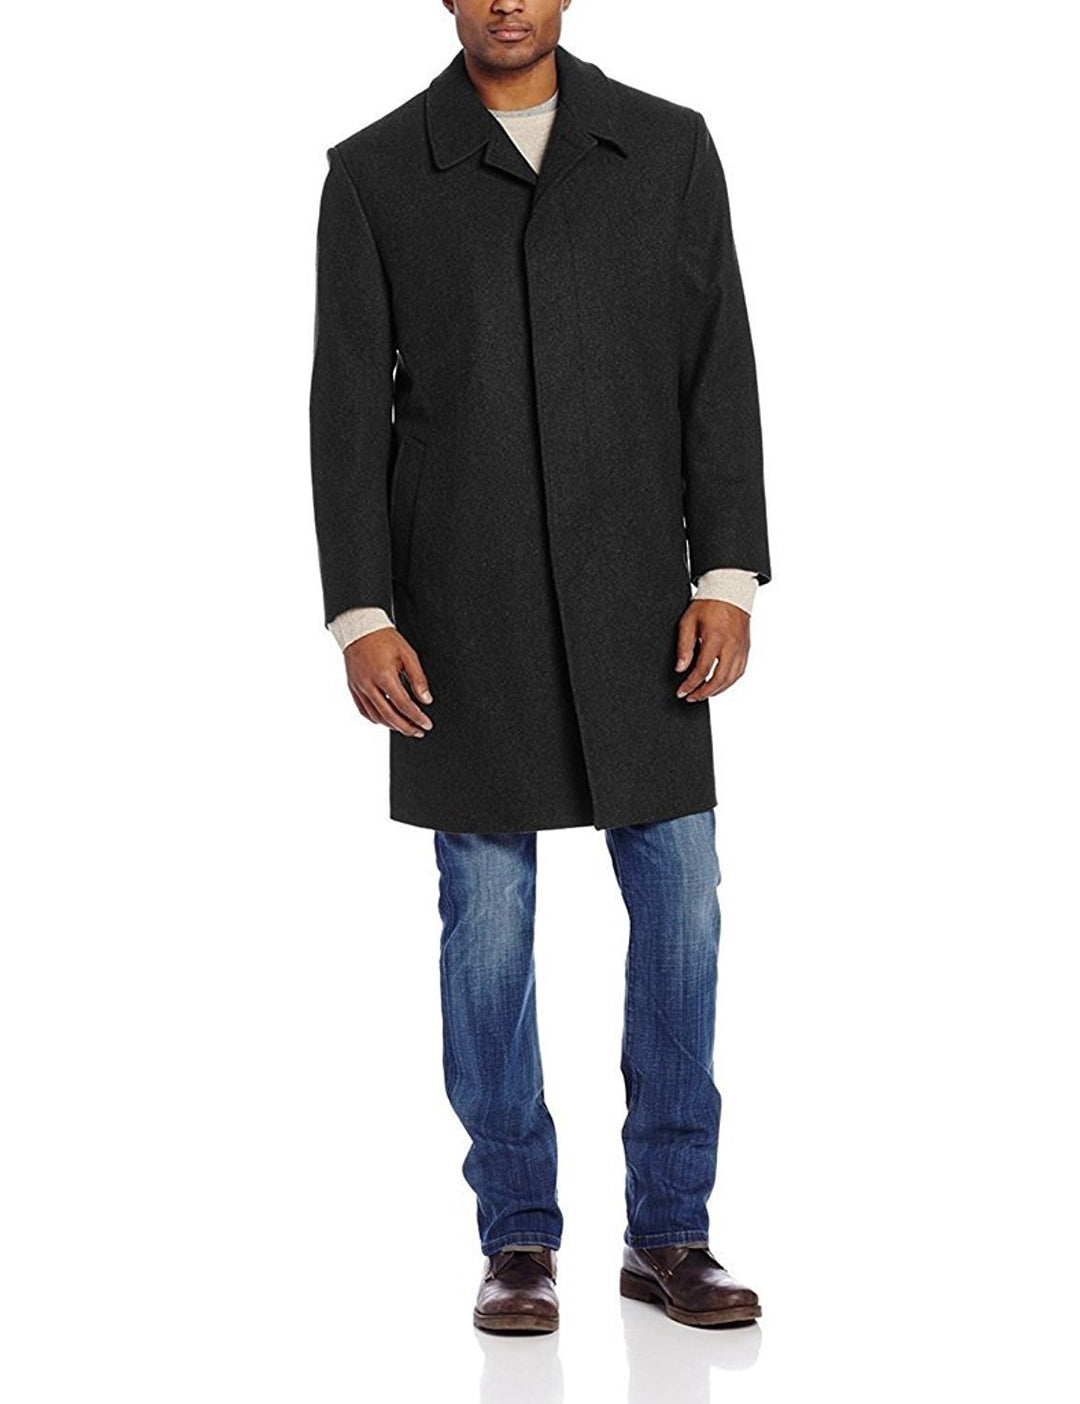 Private Label Men's Single Breasted Three Quater Length 100% Wool Topcoat - CLEARANCE - FINAL SALE